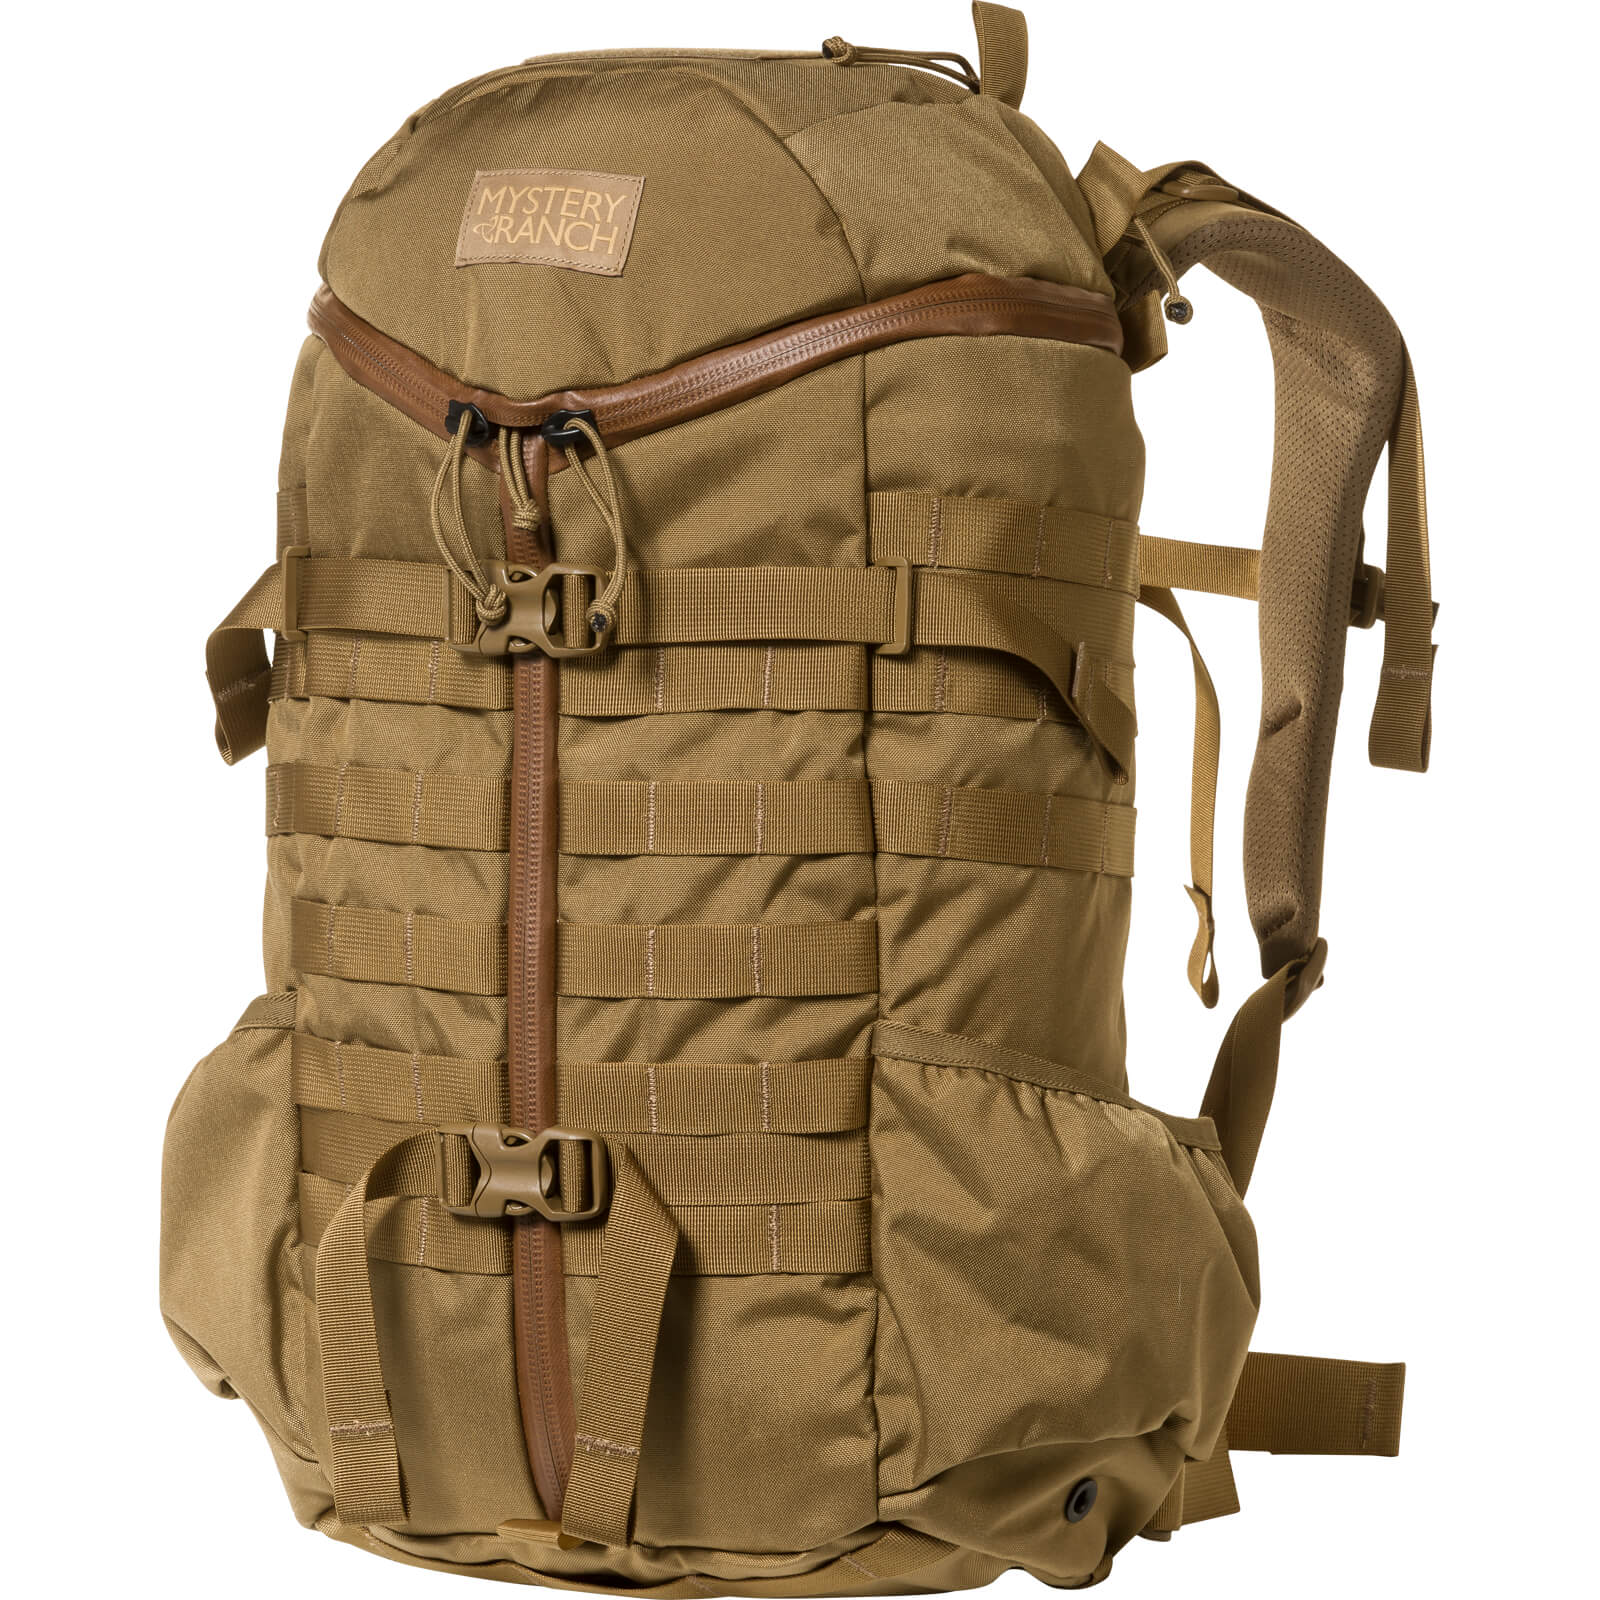 MYSTERY RANCH 2 Day Assault Backpack Tactical Packs Molle Daypack Forest 